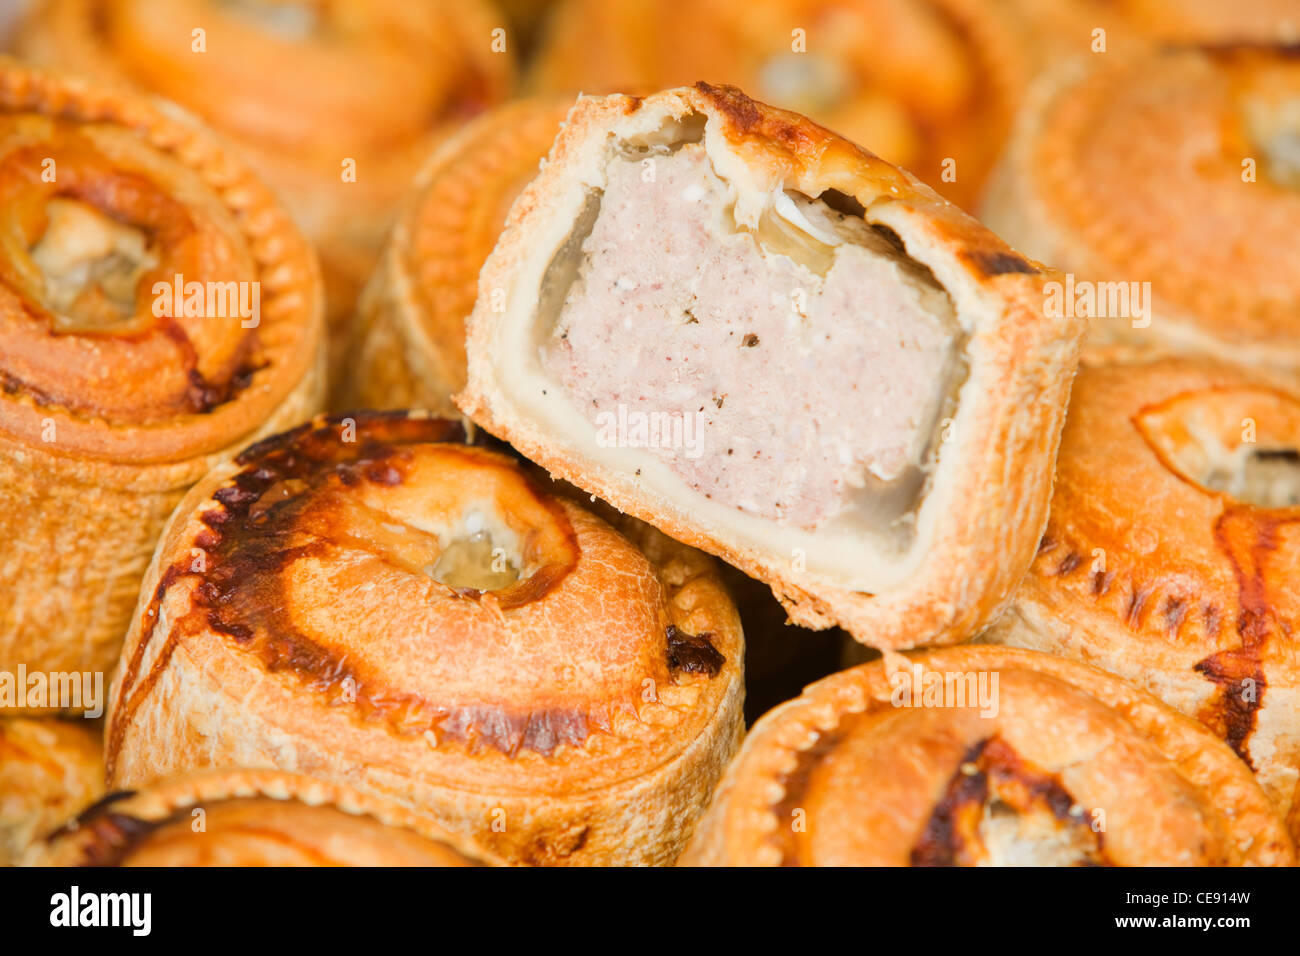 A traditional British pork pie on display at a local indoor market in England Stock Photo